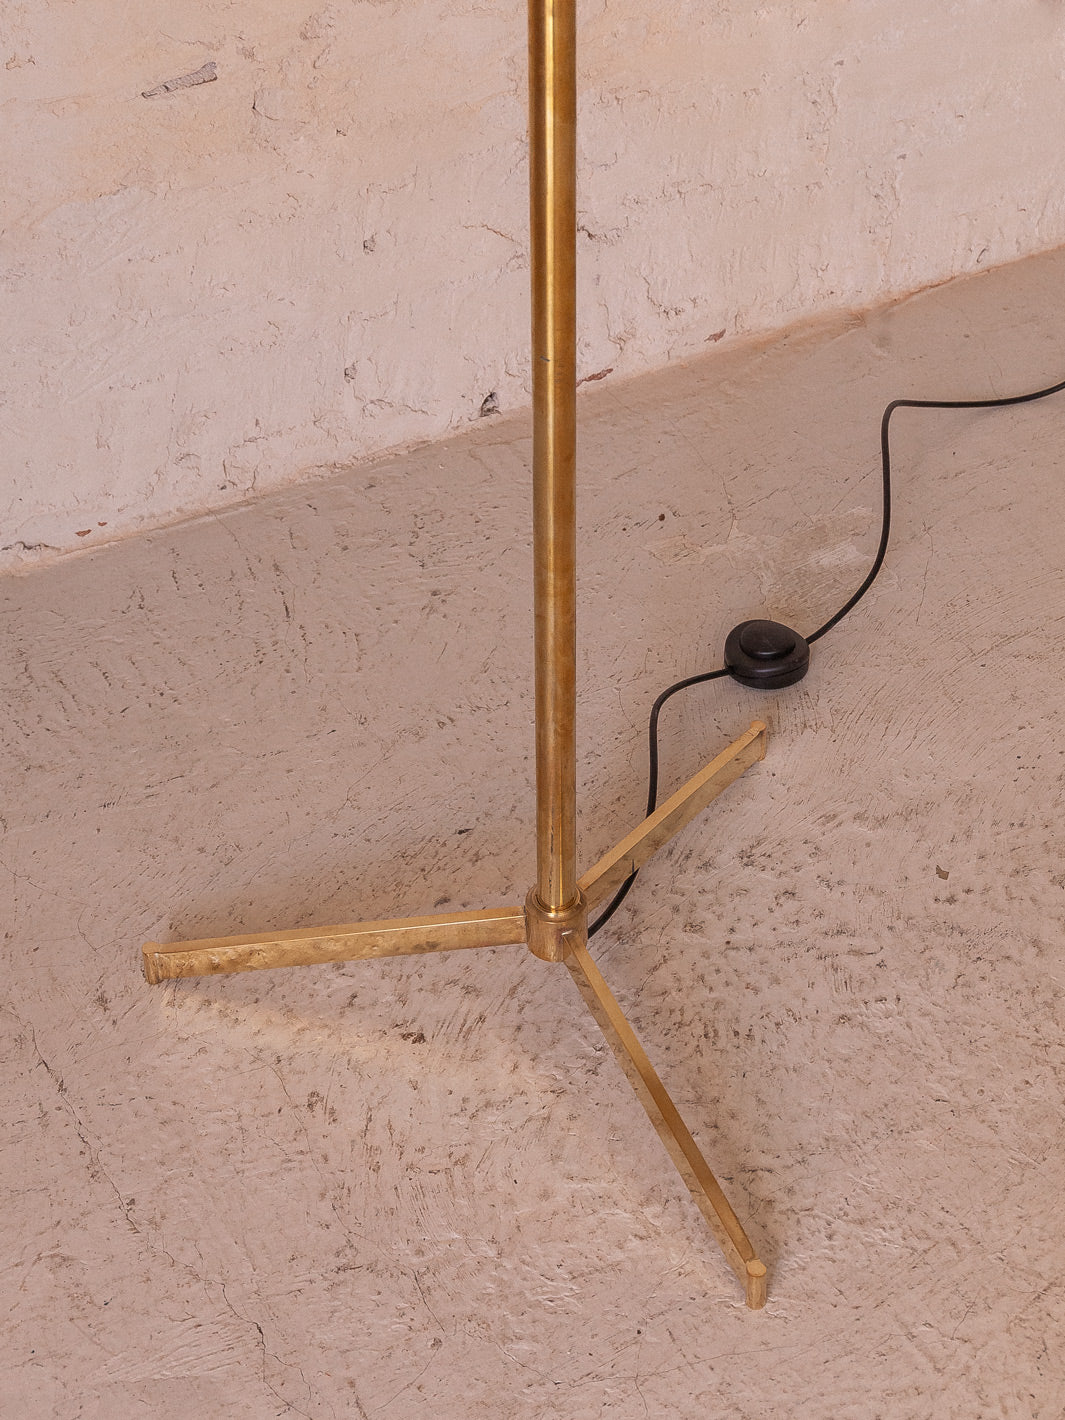 Brass floor lamp with white tulips